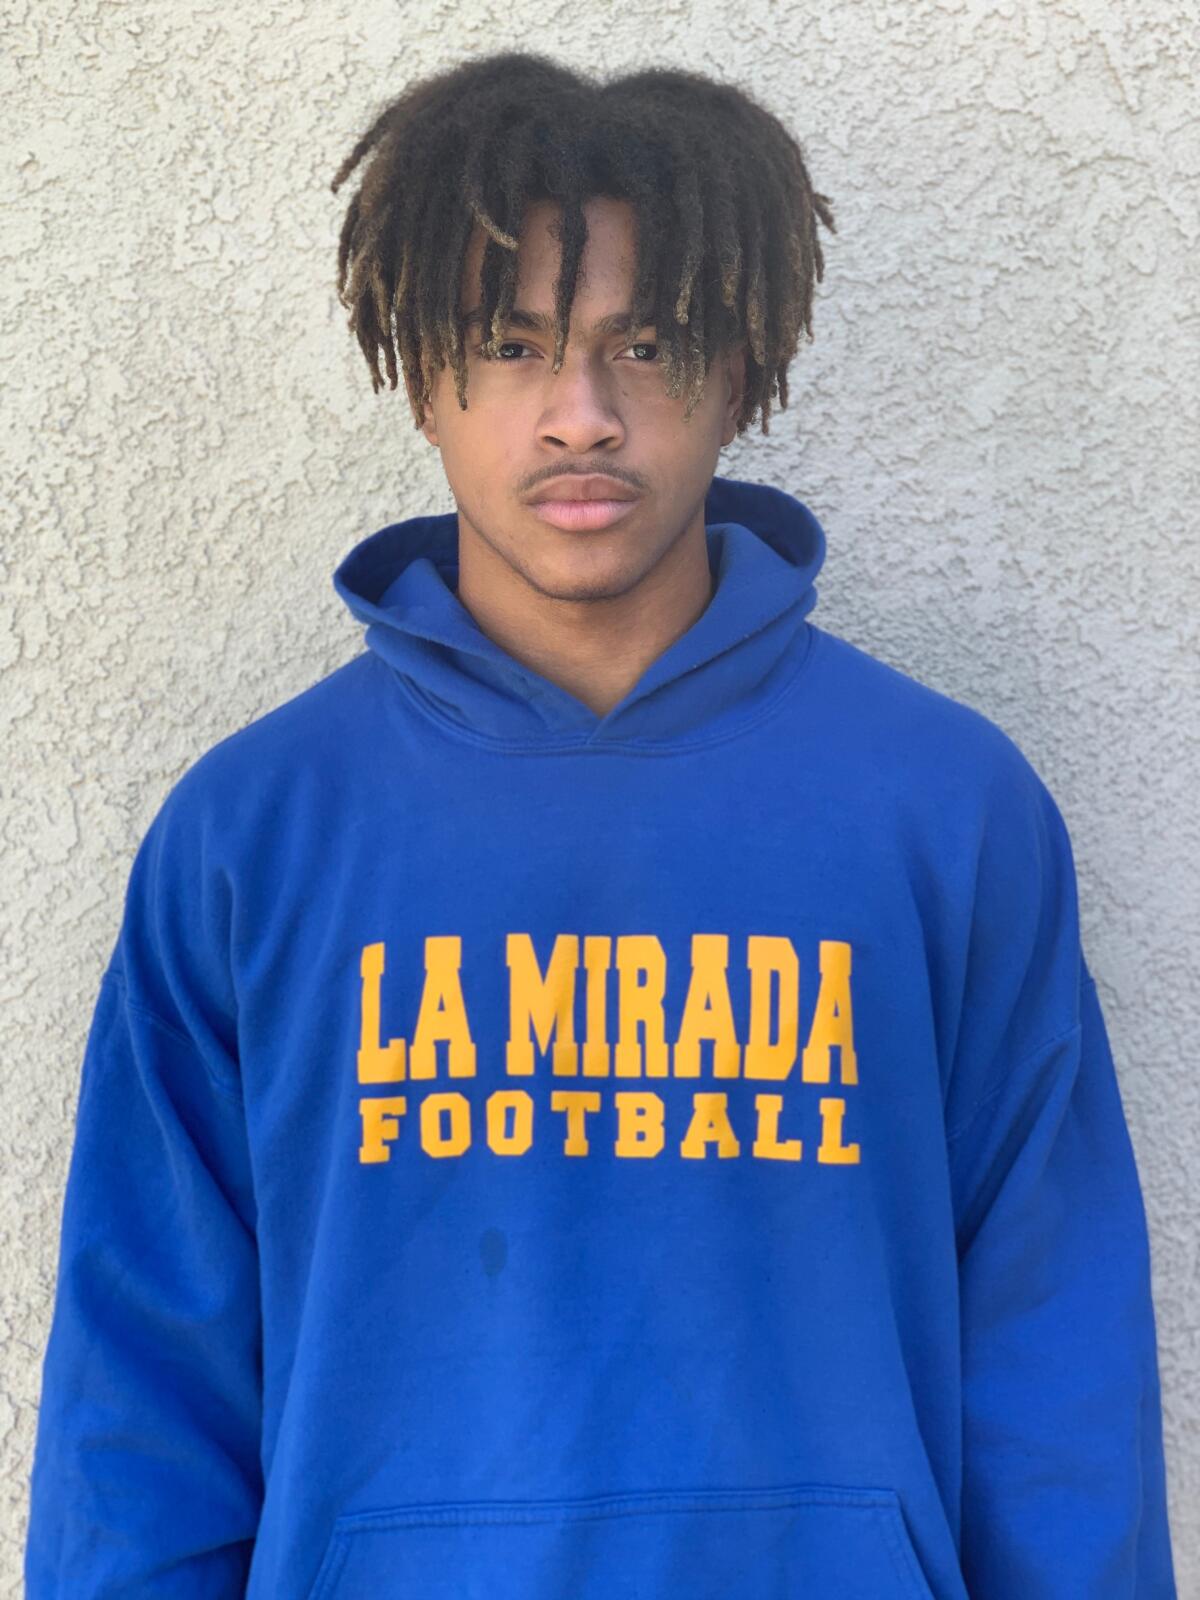 Shaun Grayson of La Mirada is a rising prospect at tight end who is committed to UNLV.